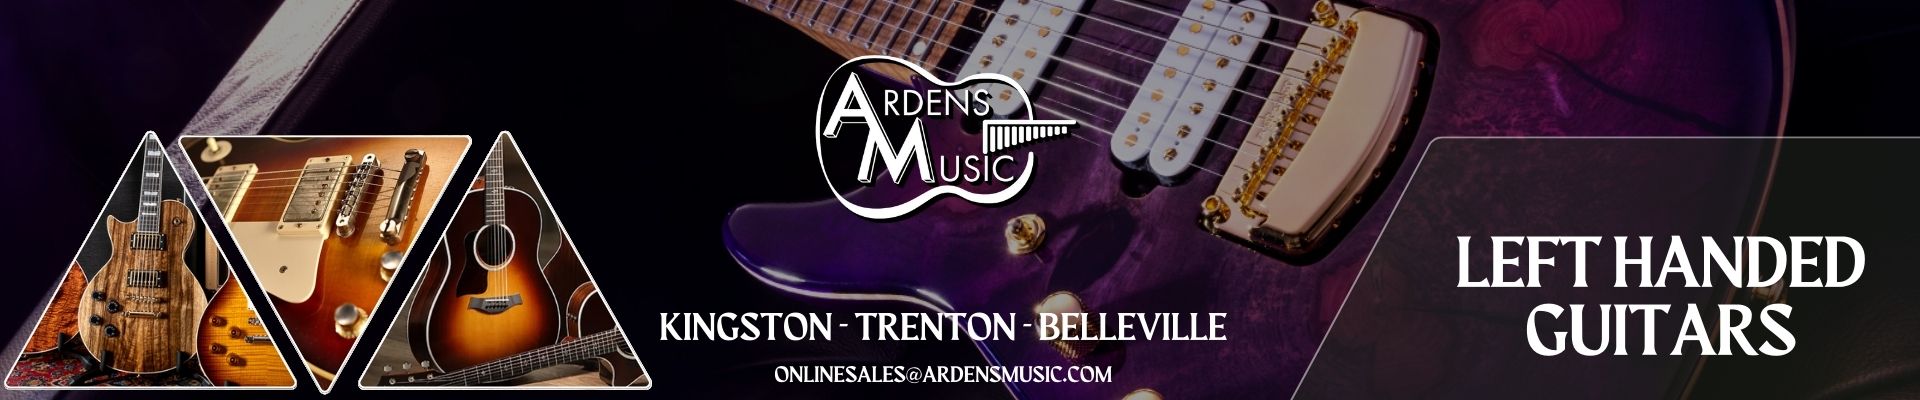 One of the most recognizable & prominent instruments in modern music. Whether you're looking for your first guitar or your next touring companion, we have you covered. Arden's offers options from brands like Fender, Squier, Epiphone, PRS, EVH, Godin, Jackson, Gretsch, Martin, Larrivee, Ibanez, Guild, Breedlove, Seagull, Takamine, and Sigma